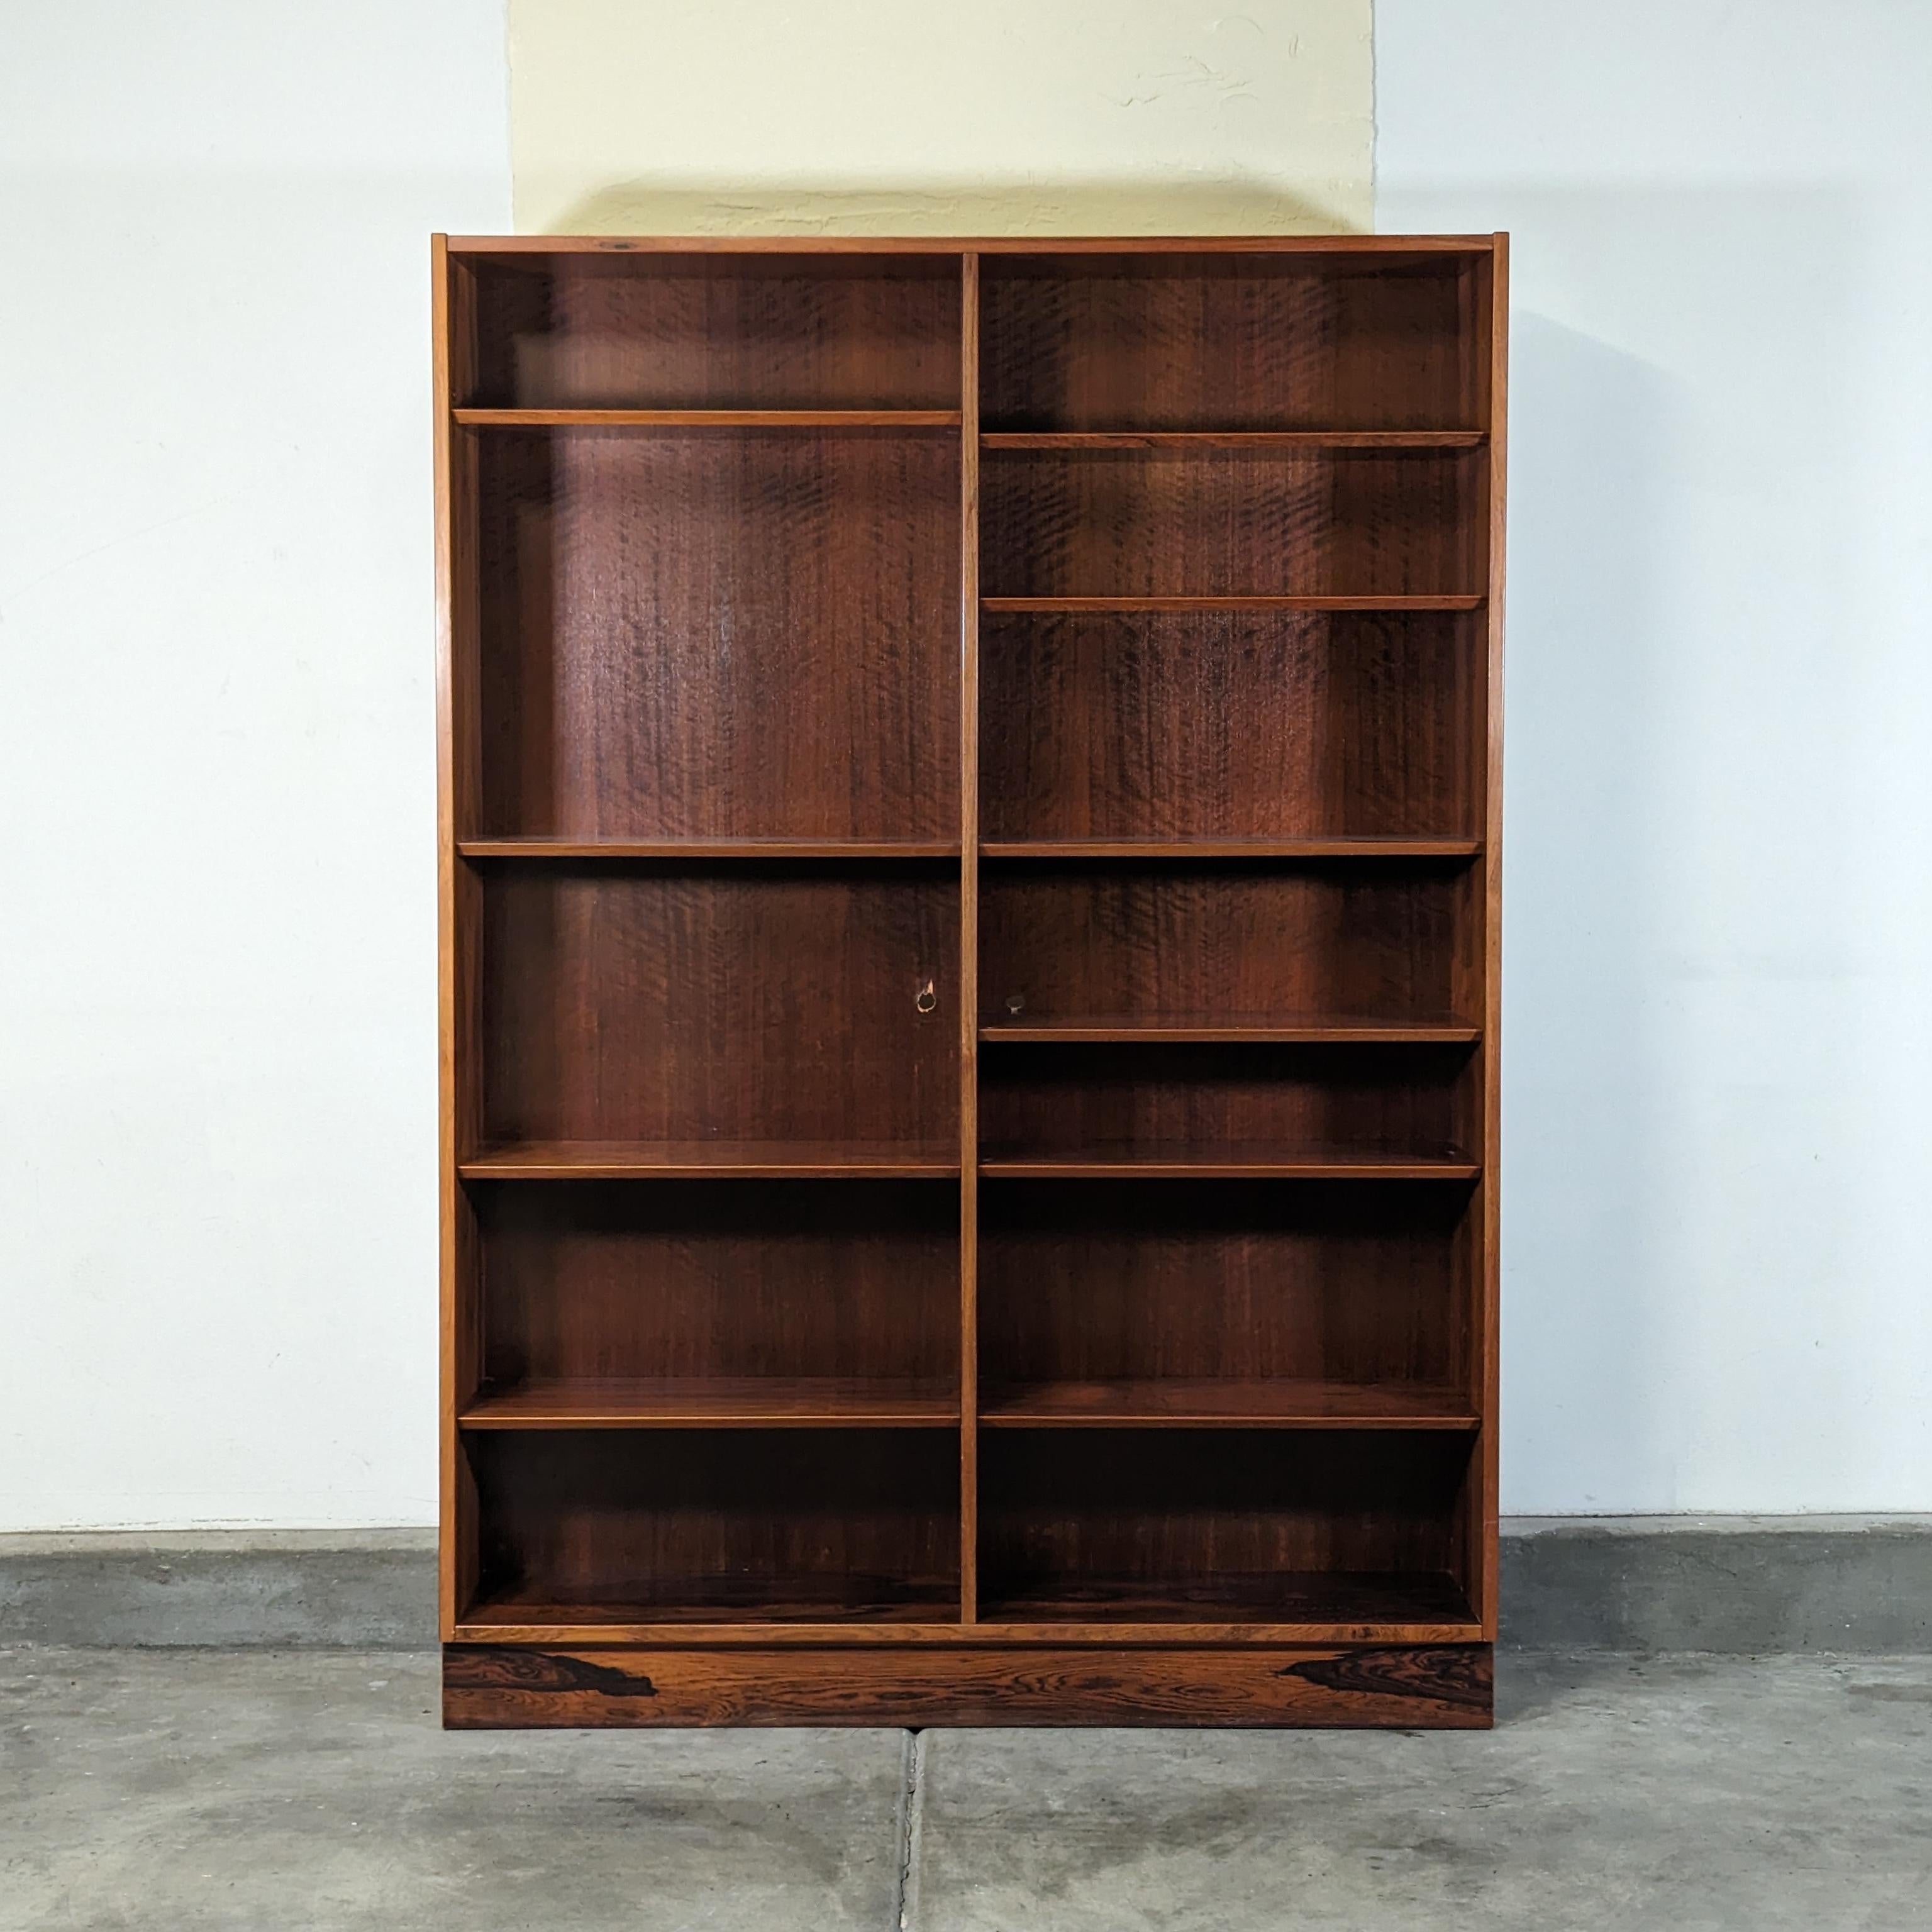 Step back in time with this exquisite vintage mid-century modern bookcase by Poul Hundevad, dating back to the 1960s, a true testament to timeless Scandinavian design. Crafted with an eye for detail, this piece showcases an extraordinary bookmatched